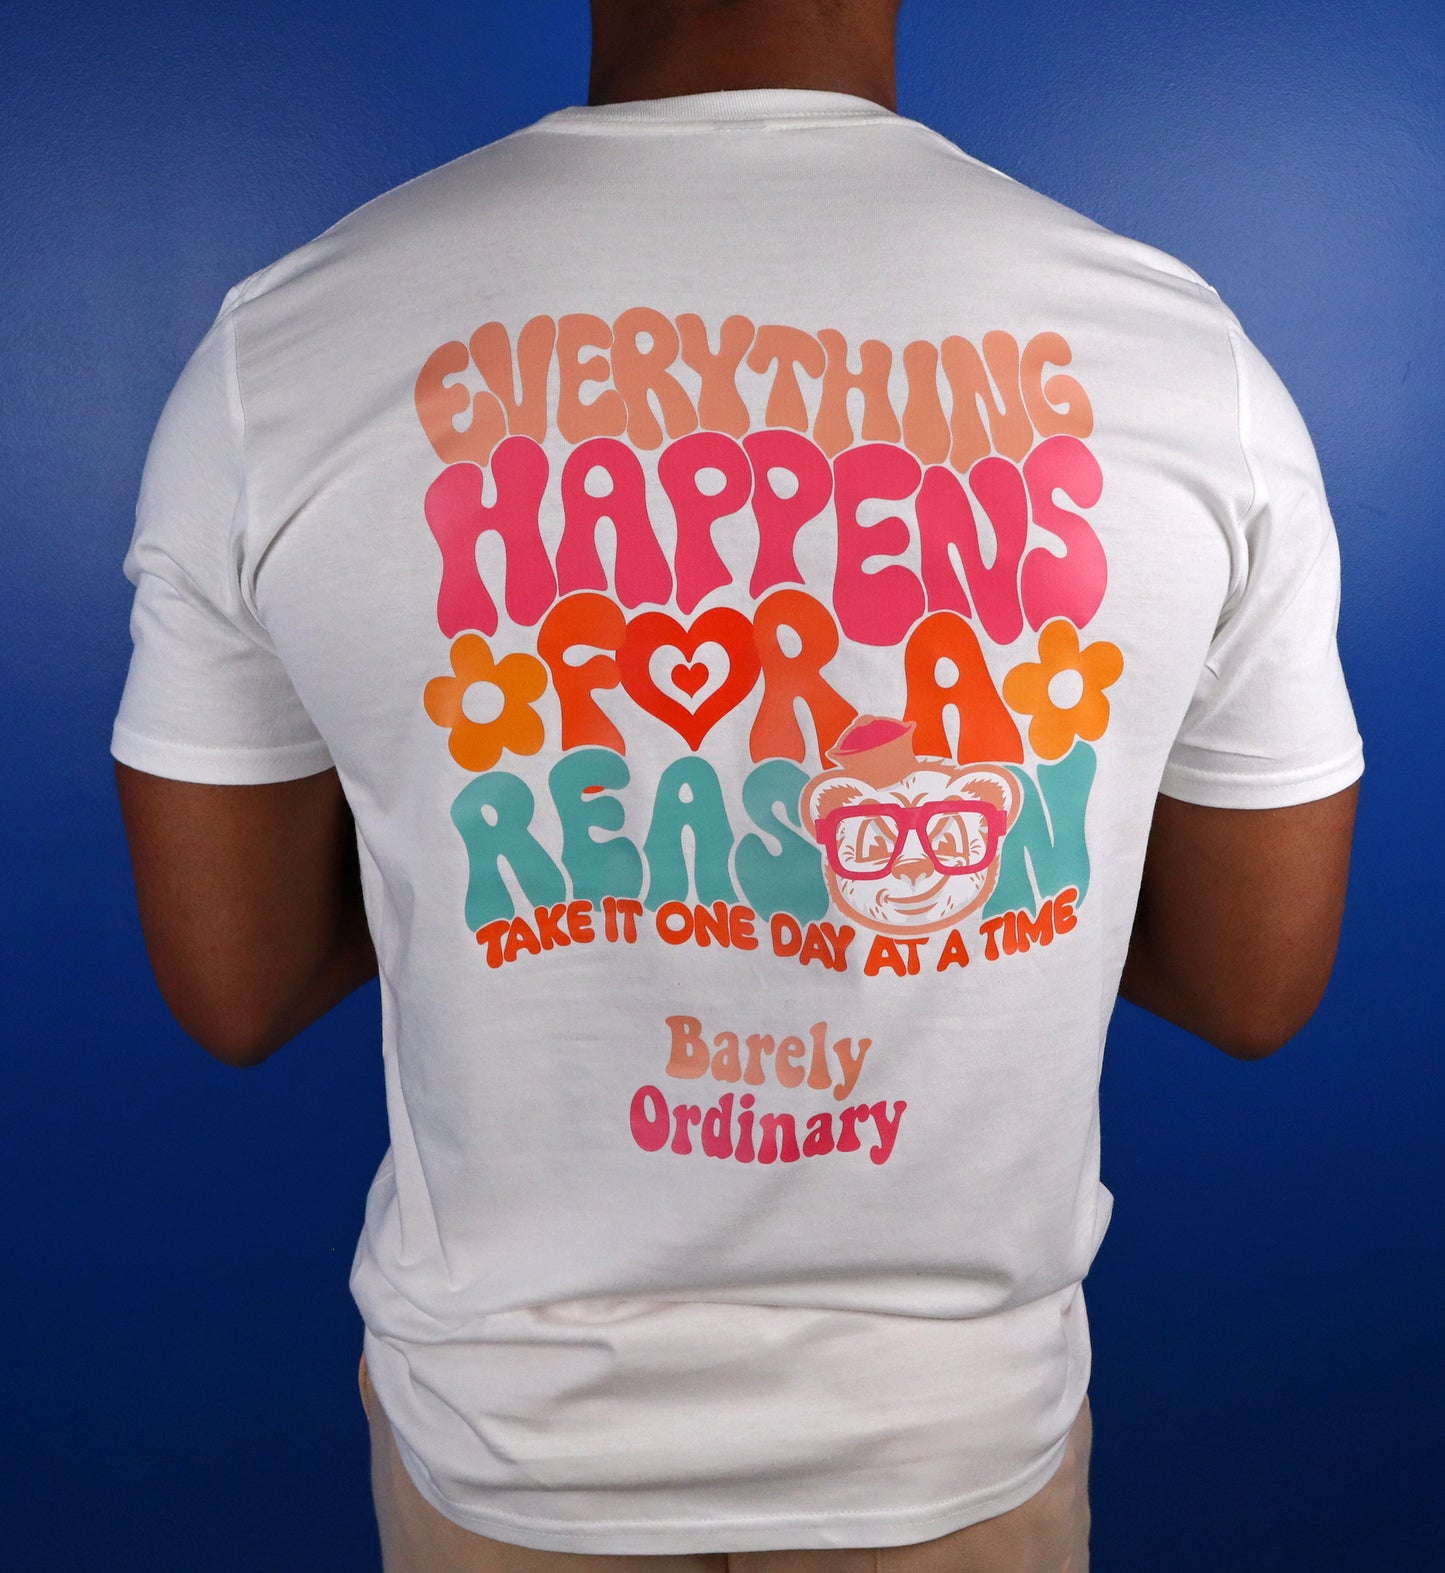 Barely "One Day At A Time" Tee